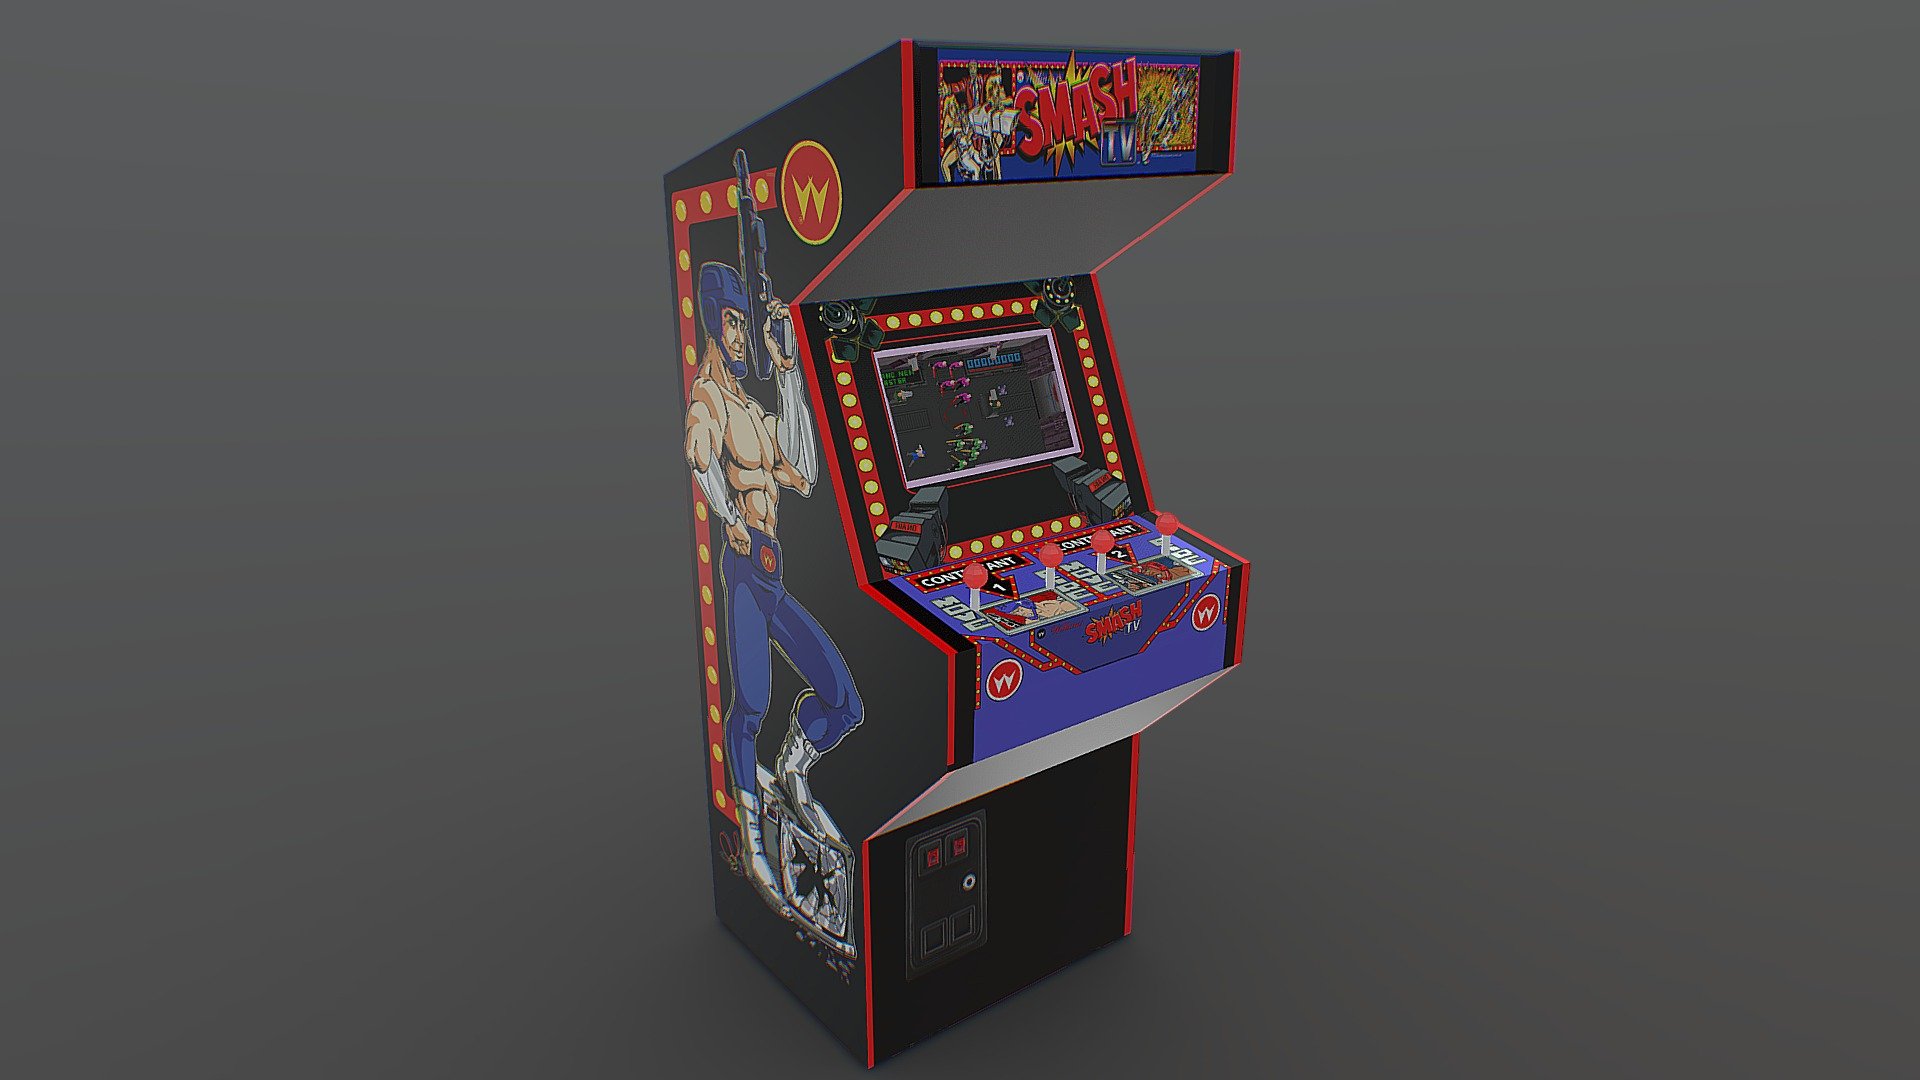 Working in blender I recreated a scene from Smash Tv. I then took that scene and put that in the arcade cabinet.

This was a fun project for the 

ArcadeGameChallenge
I'd buy that for a dollar! - Smash Tv #ArcadeGameChallenge - Download Free 3D model by Austin Beaulier (@Austin.Beaulier) 3d model